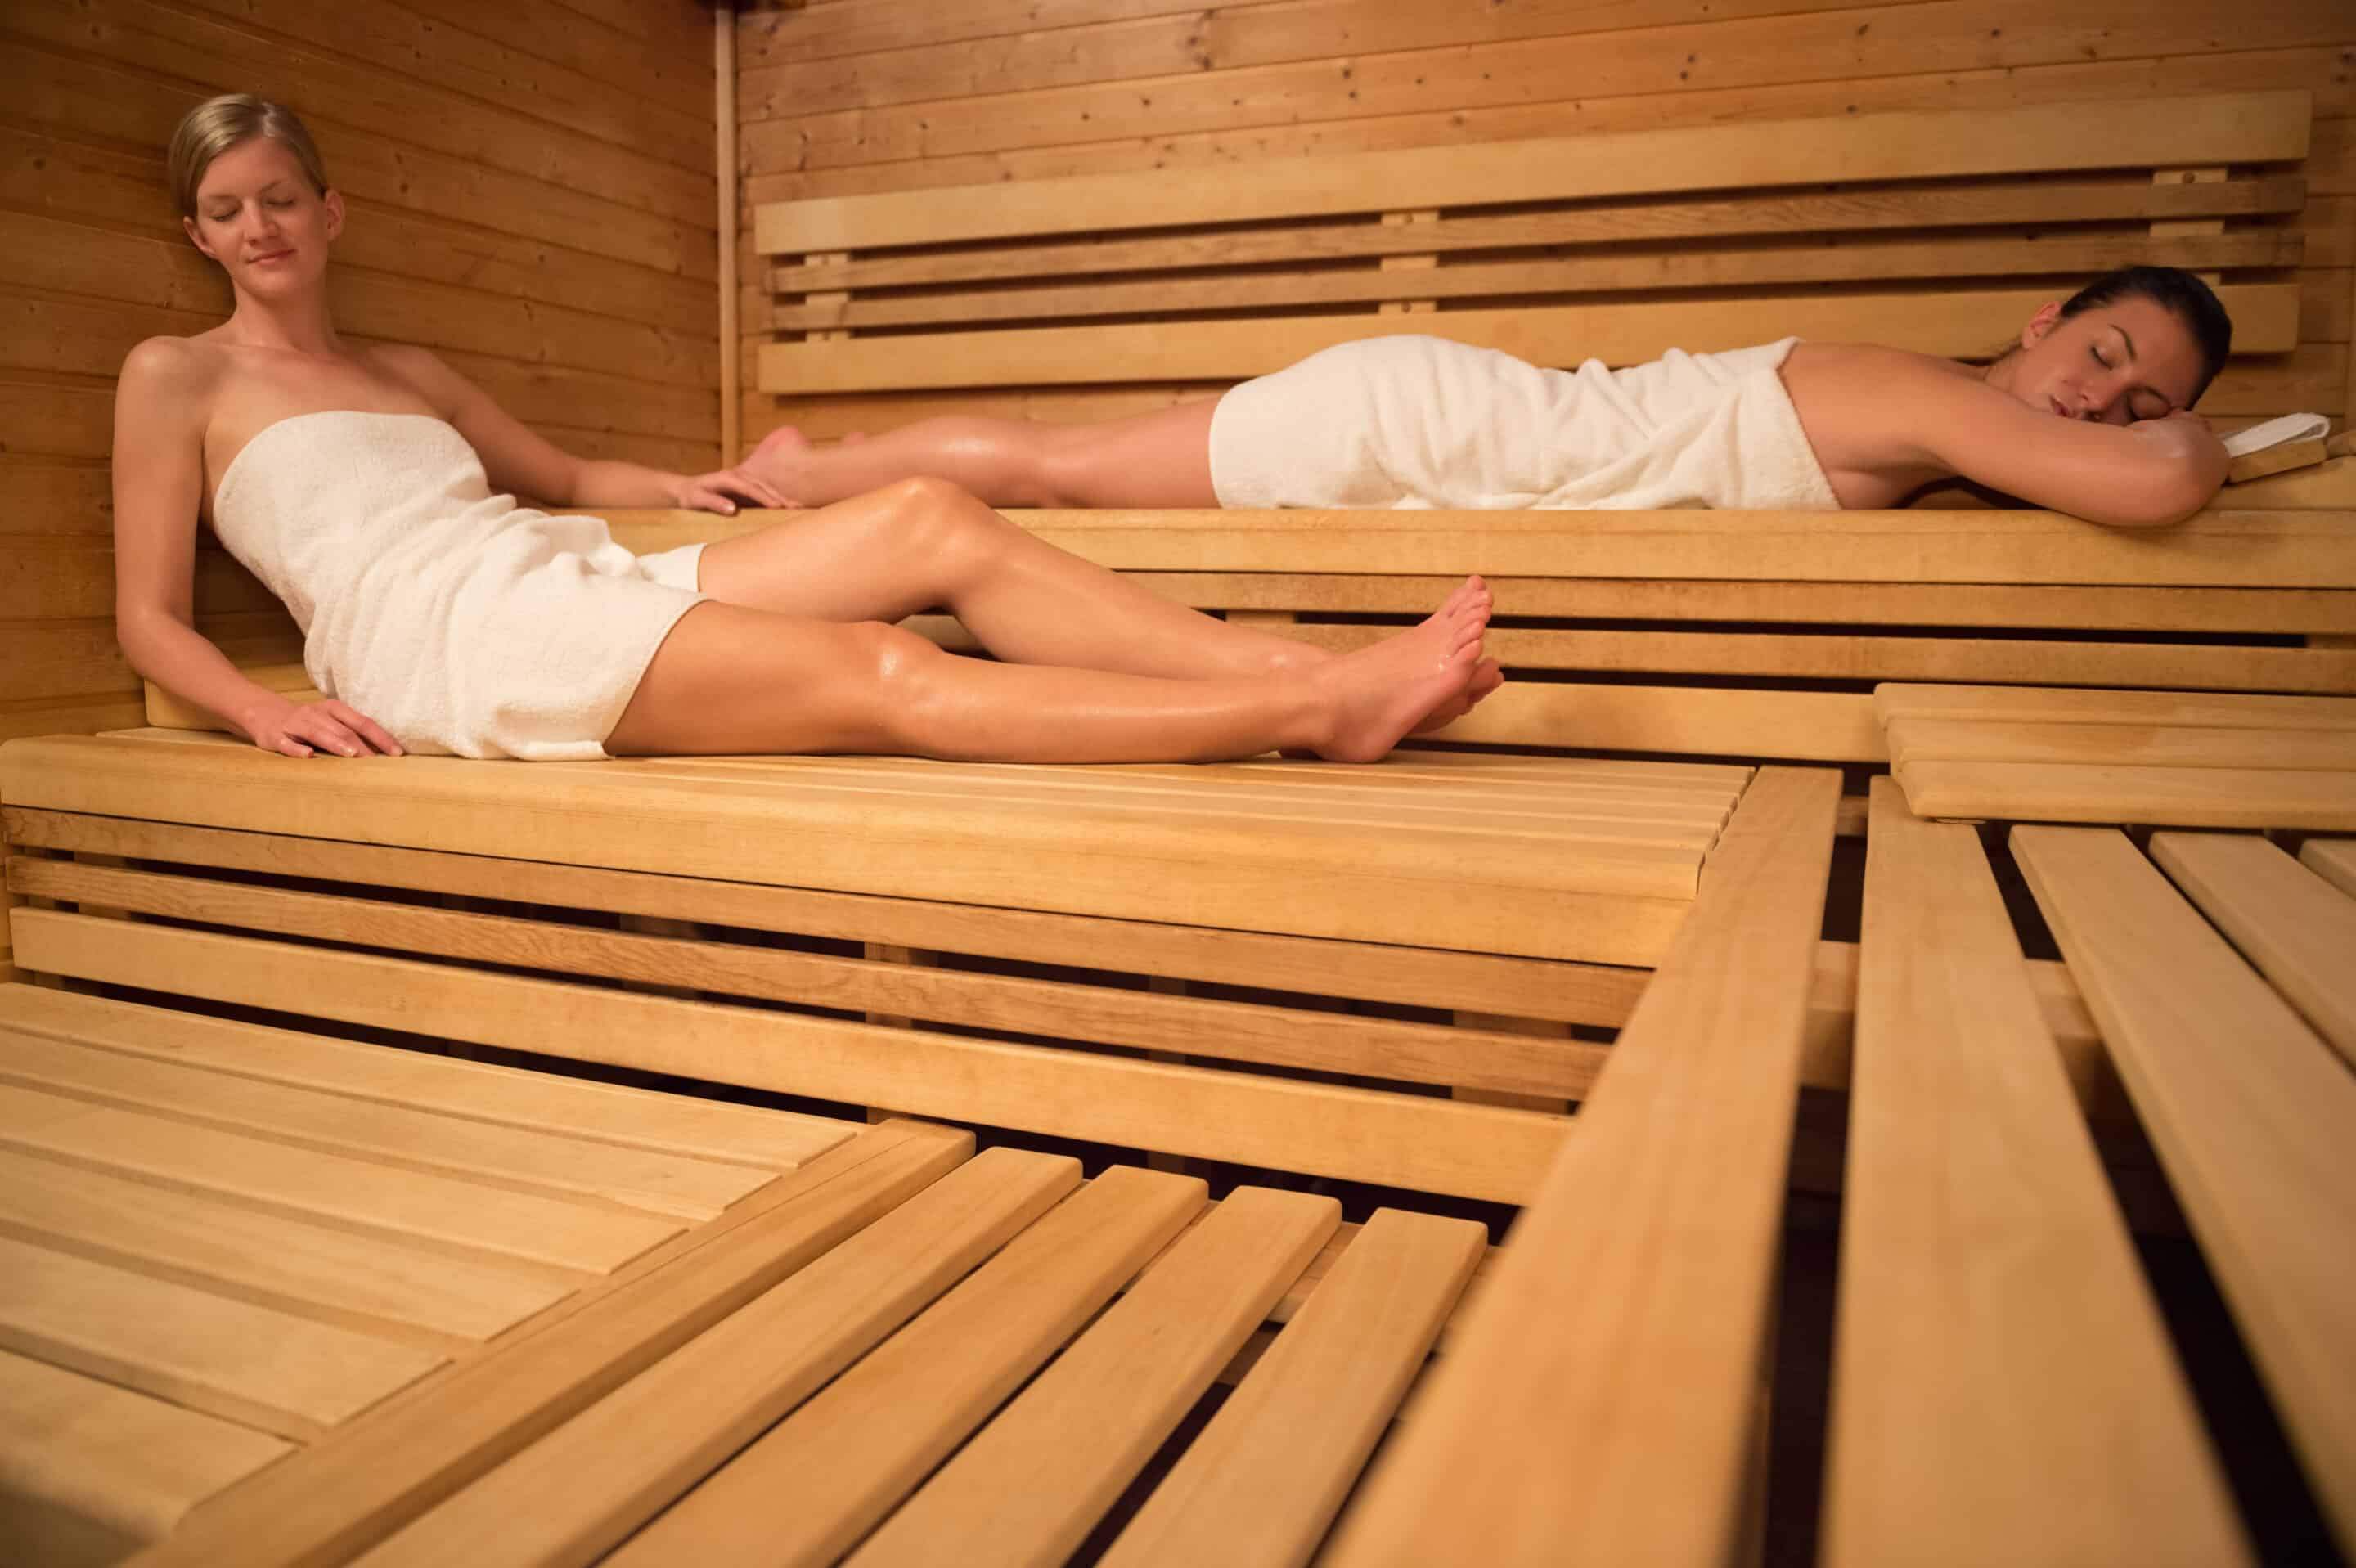 Two women relaxing on wooden benches in sauna. Trying a Nordic Spa in Québec City offers the chance to experience a choice of thermotherapies.